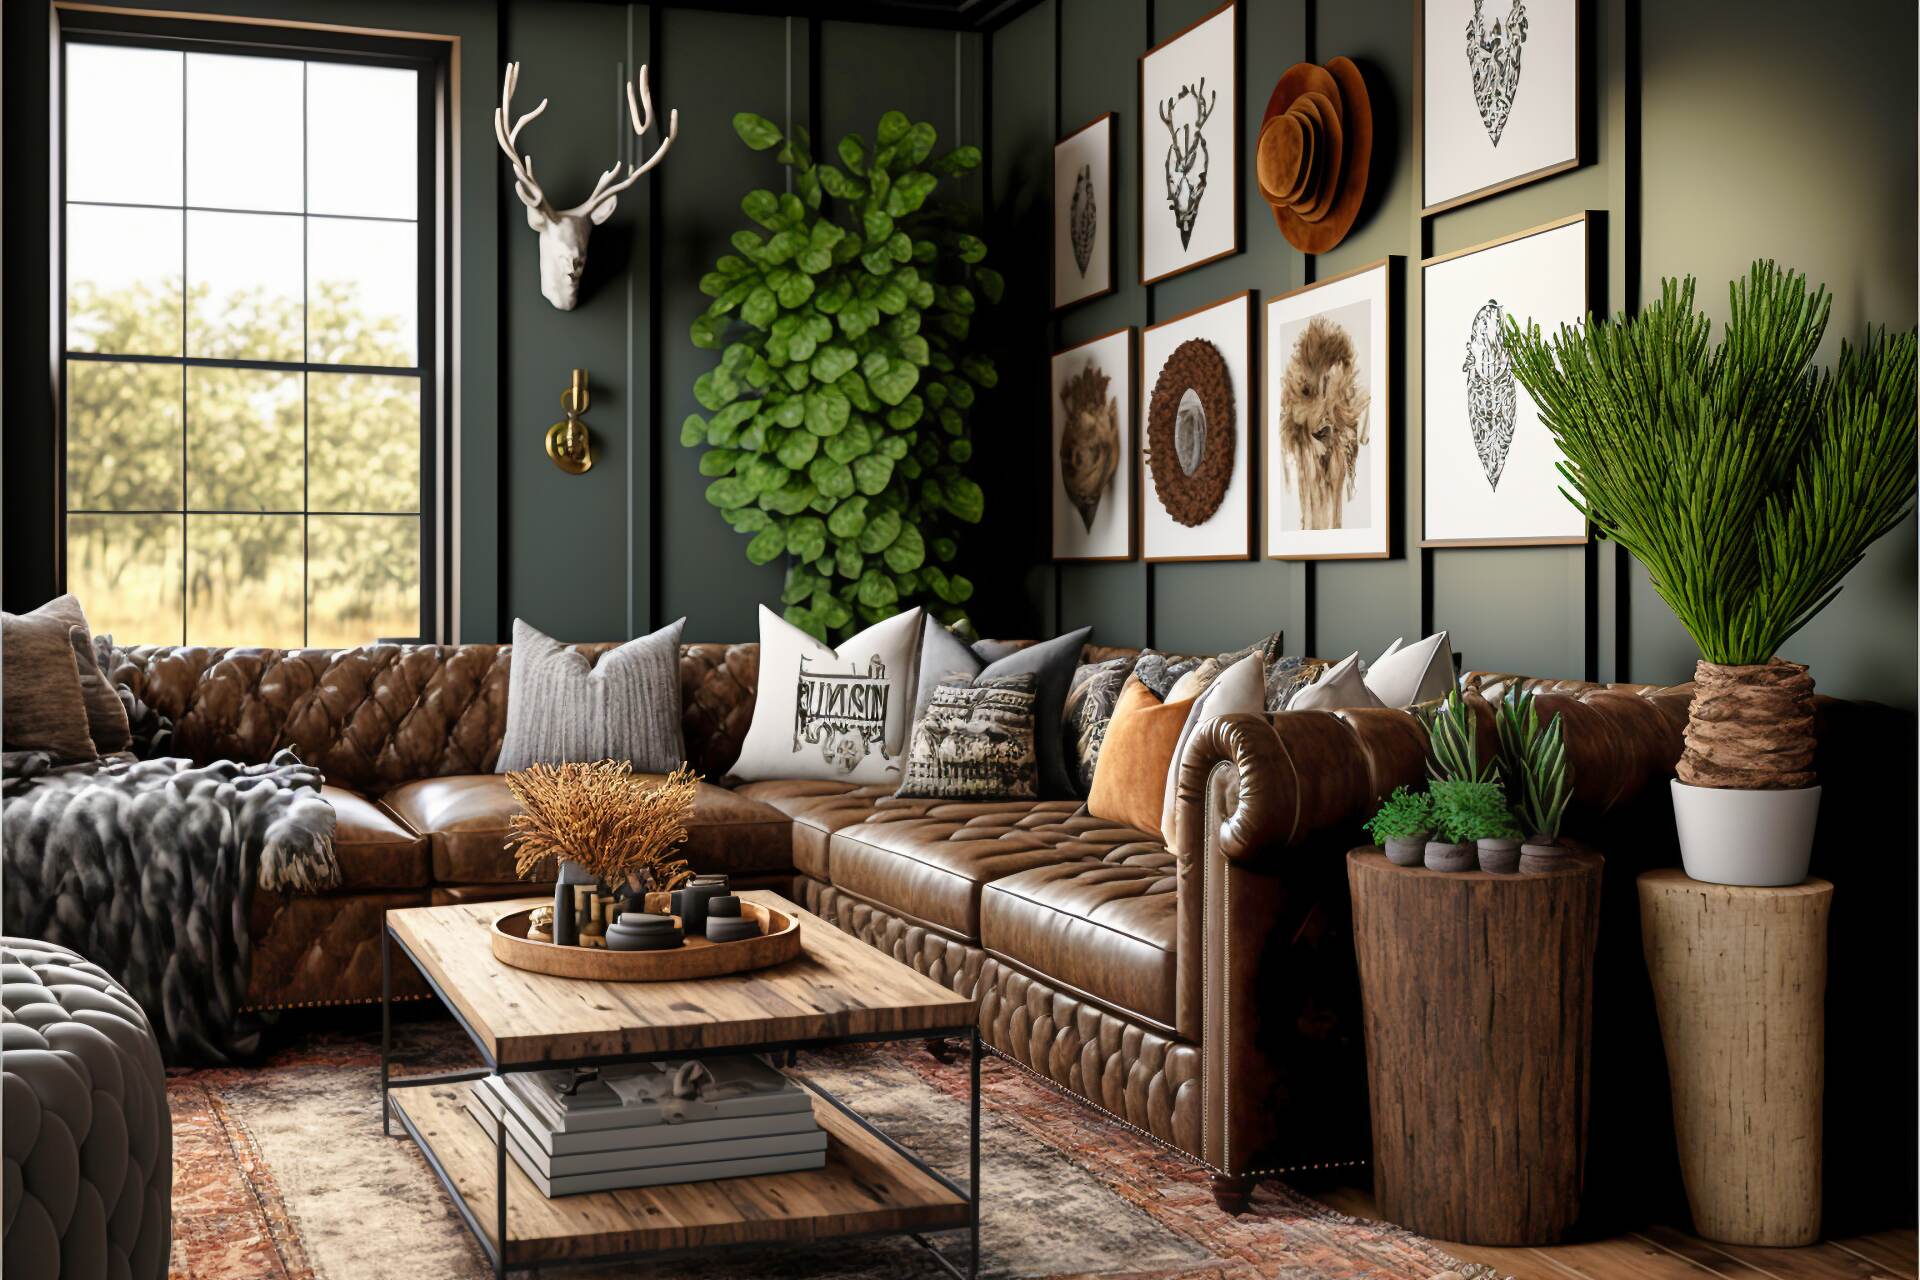 Richly Rustic Living Room - This Expanse Of This Rustic Maximalist Living Room Is Inviting And Comfortable. A Dark-Toned, Tufted Sectional Sofa And Matching Armchair Provide Seating For Friends And Family, While A Chic Rug And Vintage Side Table Finish The Corner. Natural Greenery, Iron Wall Artwork, And A Classic Wall-Mount Flat-Screen Bring Modern Convenience To The Cozy, Rustic Atmosphere.